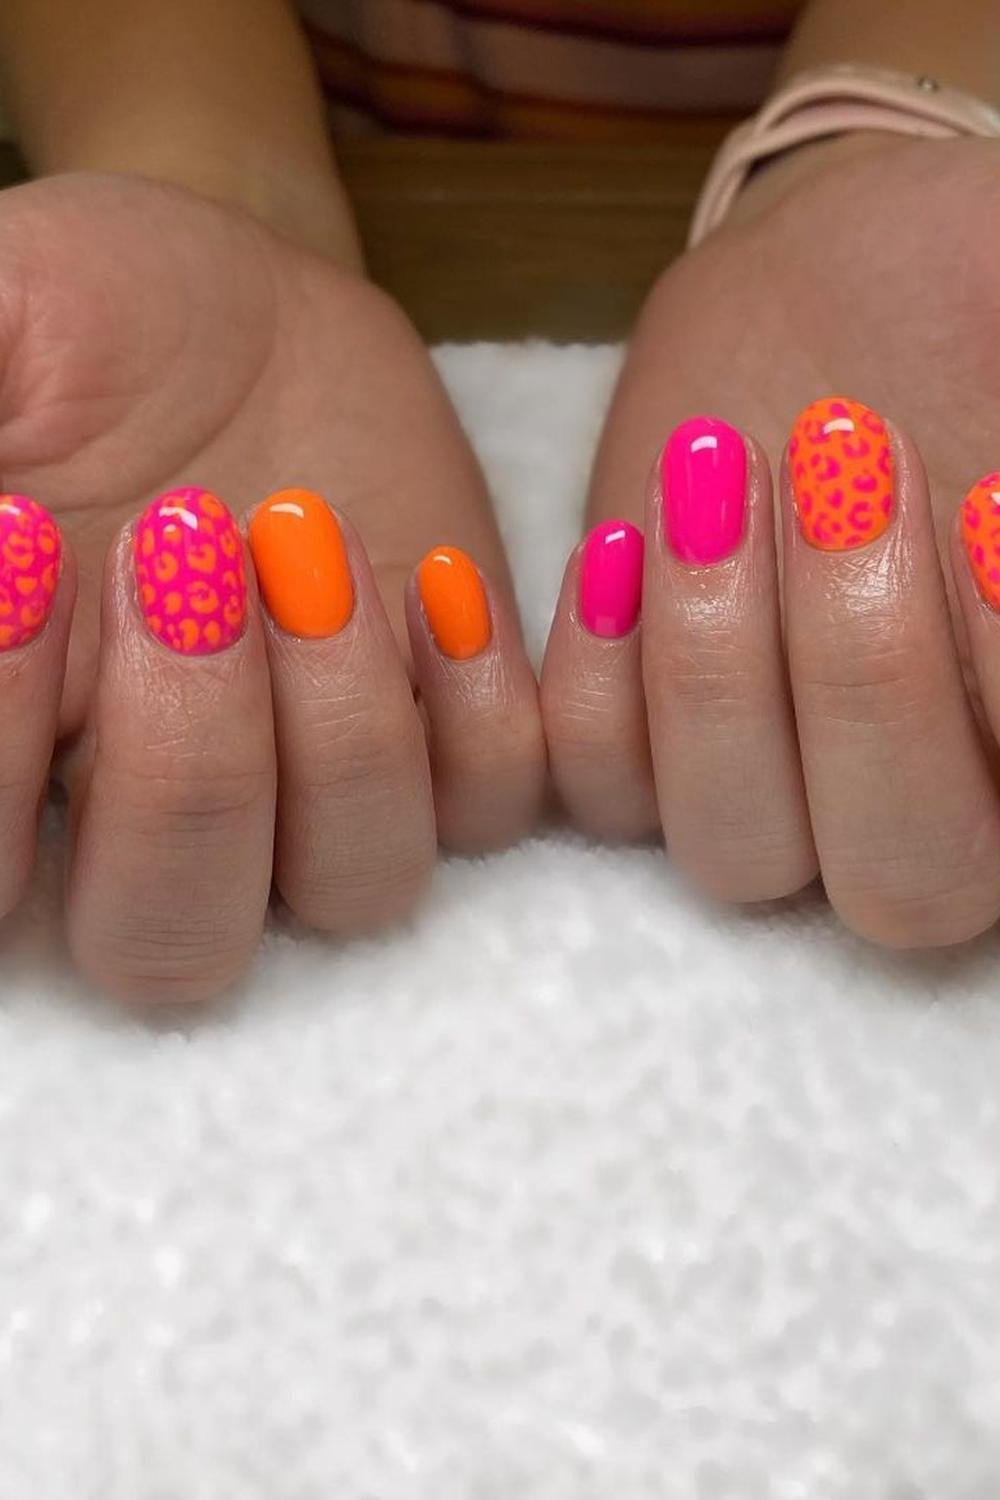 37 - Picture of Pink and Orange Nails